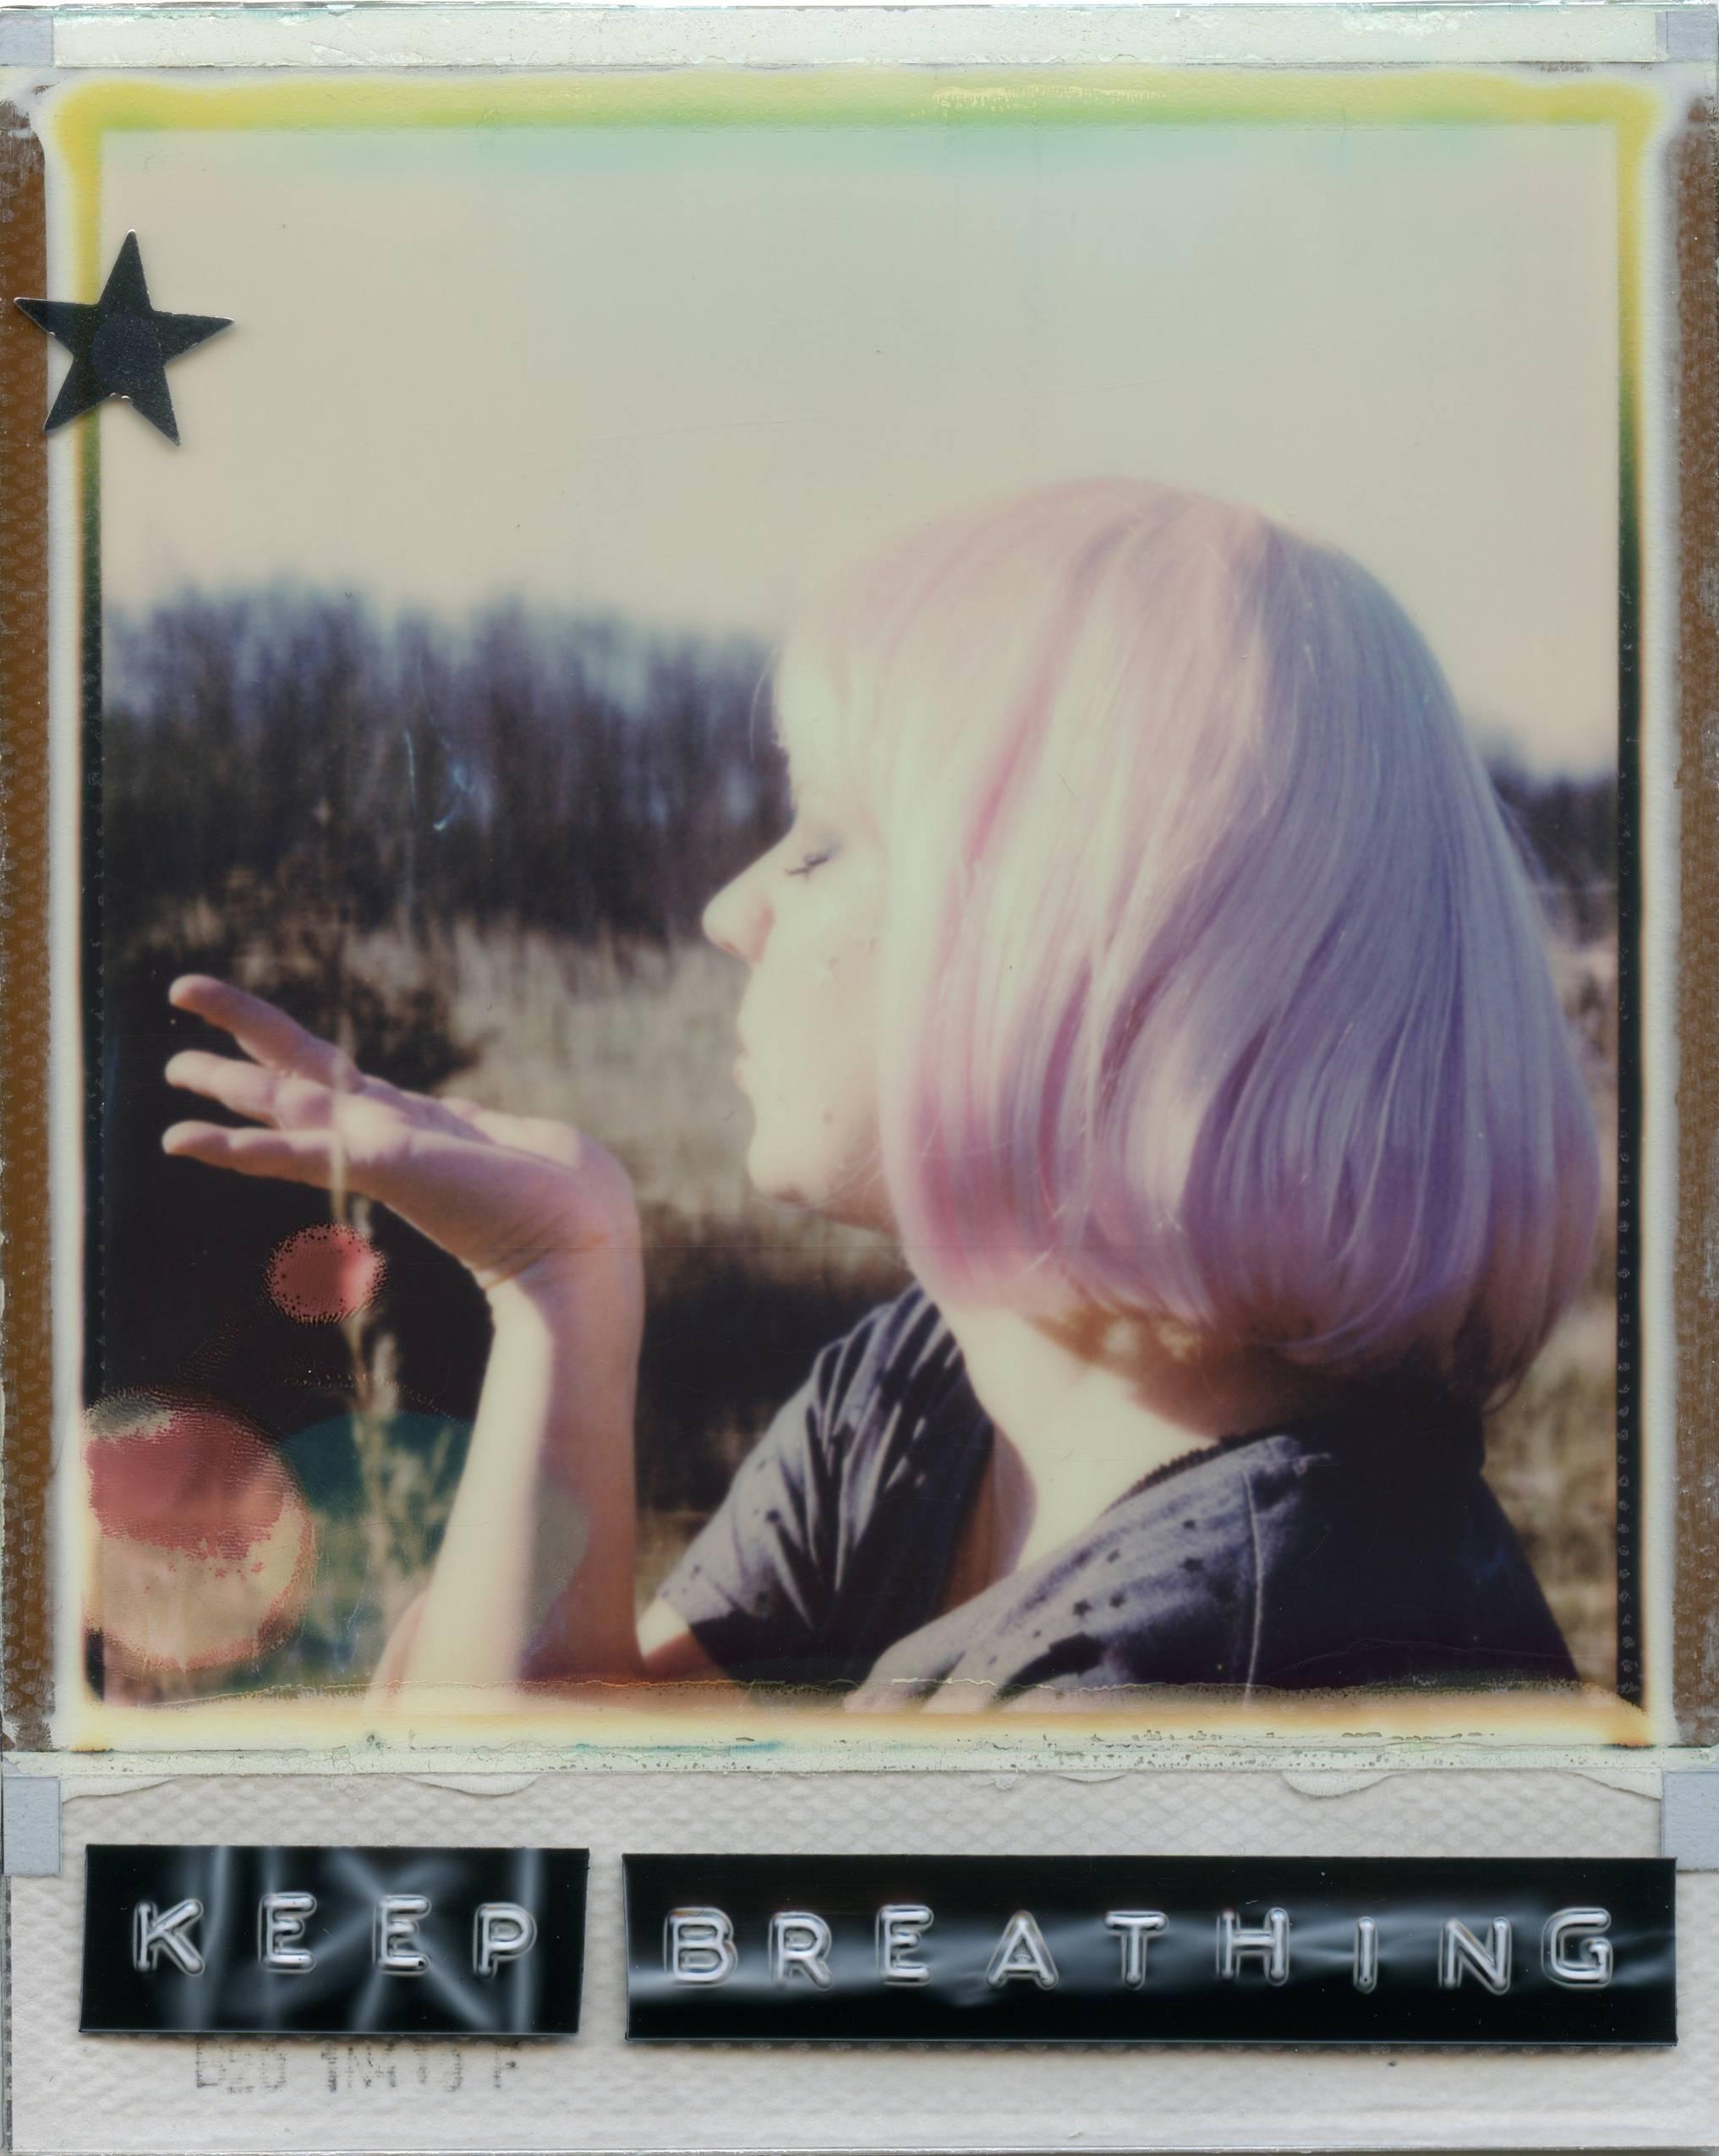 The Trick Is To Keep Breathing - based on 2 Polaroids – Photograph von Julia Beyer